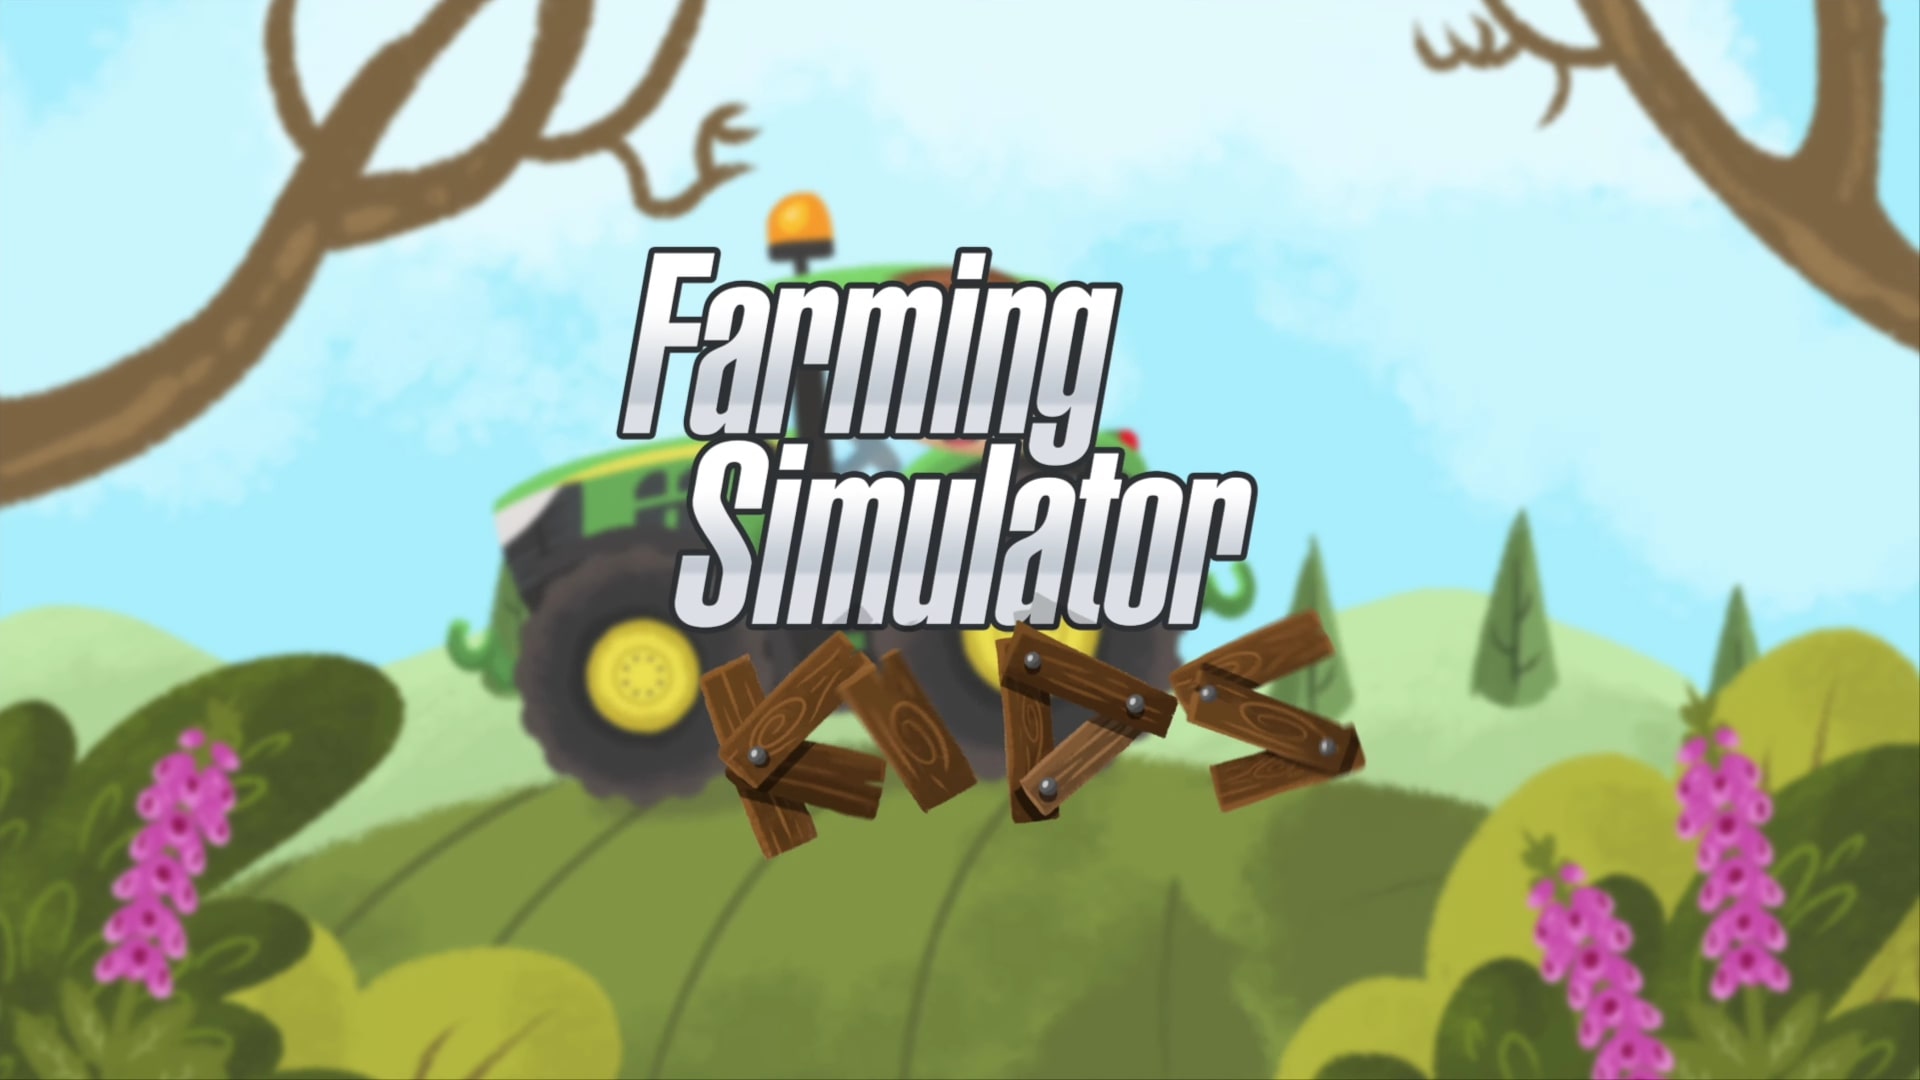 Introducing "Farming Simulator Kids": A New Virtual Adventure For Kids Is Now Available!